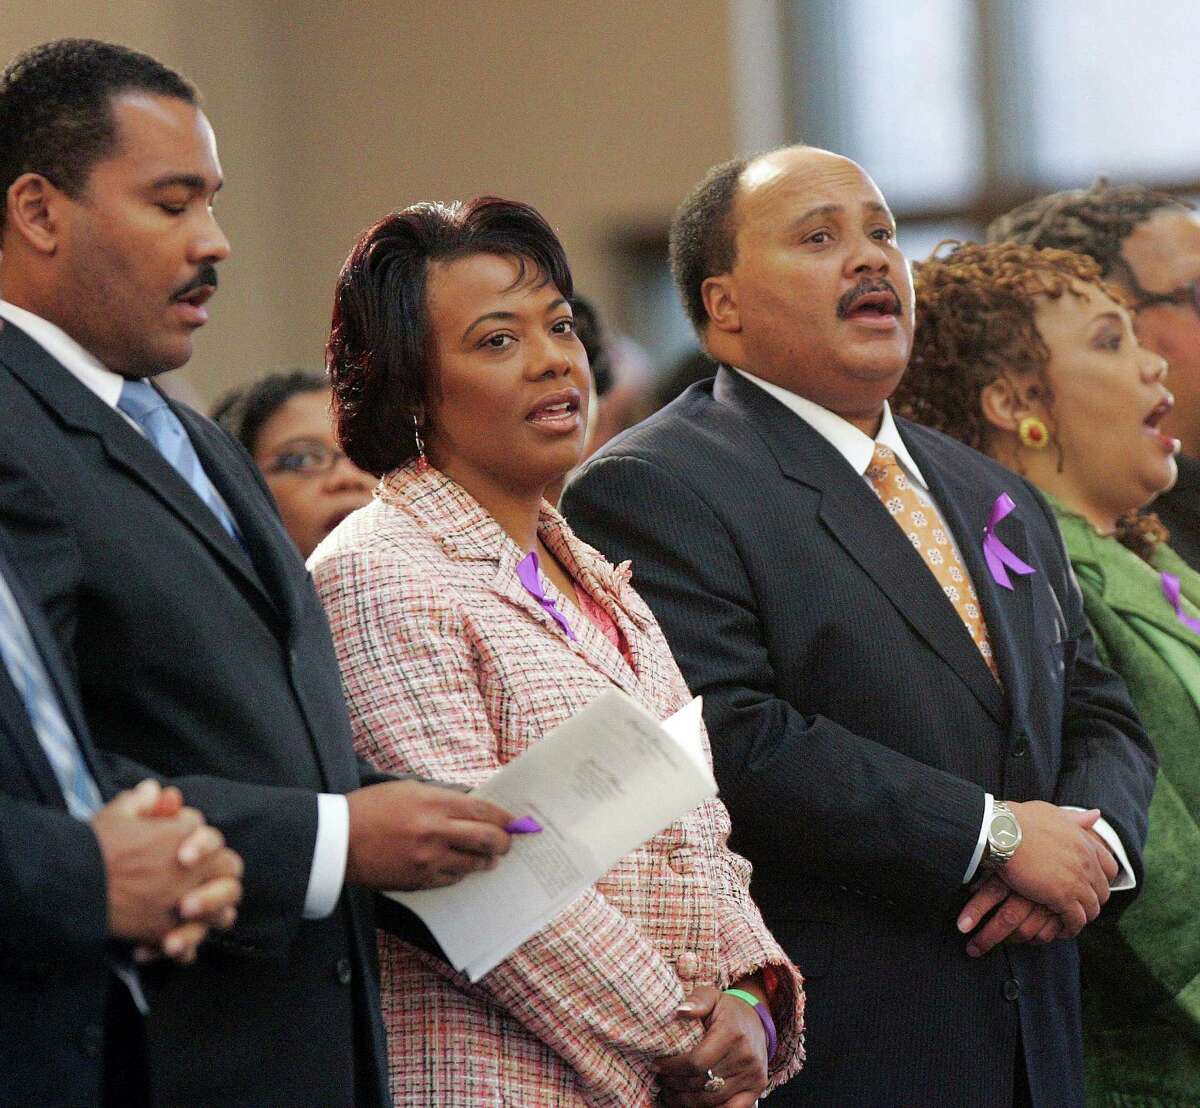 FILE - In this Feb. 6, 2006, file photo, From left to right, the children of the Rev. Martin Luther King Jr., and Coretta Scott King, Dexter Scott King, the Rev. Bernice King, Martin Luther King III and Yolanda King participate in a musical tribute to their mother at the new Ebenezer Baptist Church in Atlanta. A judge on Monday, Aug. 15, 2016, signed an order ending an ownership dispute over the Rev. Martin Luther King's traveling Bible and Nobel Peace Prize medal that had essentially pitted the slain civil rights leader's two sons against Bernice. The consent order signed by Fulton County Superior Court Judge Robert McBurney says the items are to be released to Martin Luther King III as chairman of the board of his father's estate but does not indicate what will happen to them after that. (AP Photo/John Bazemore, File) ORG XMIT: AX102